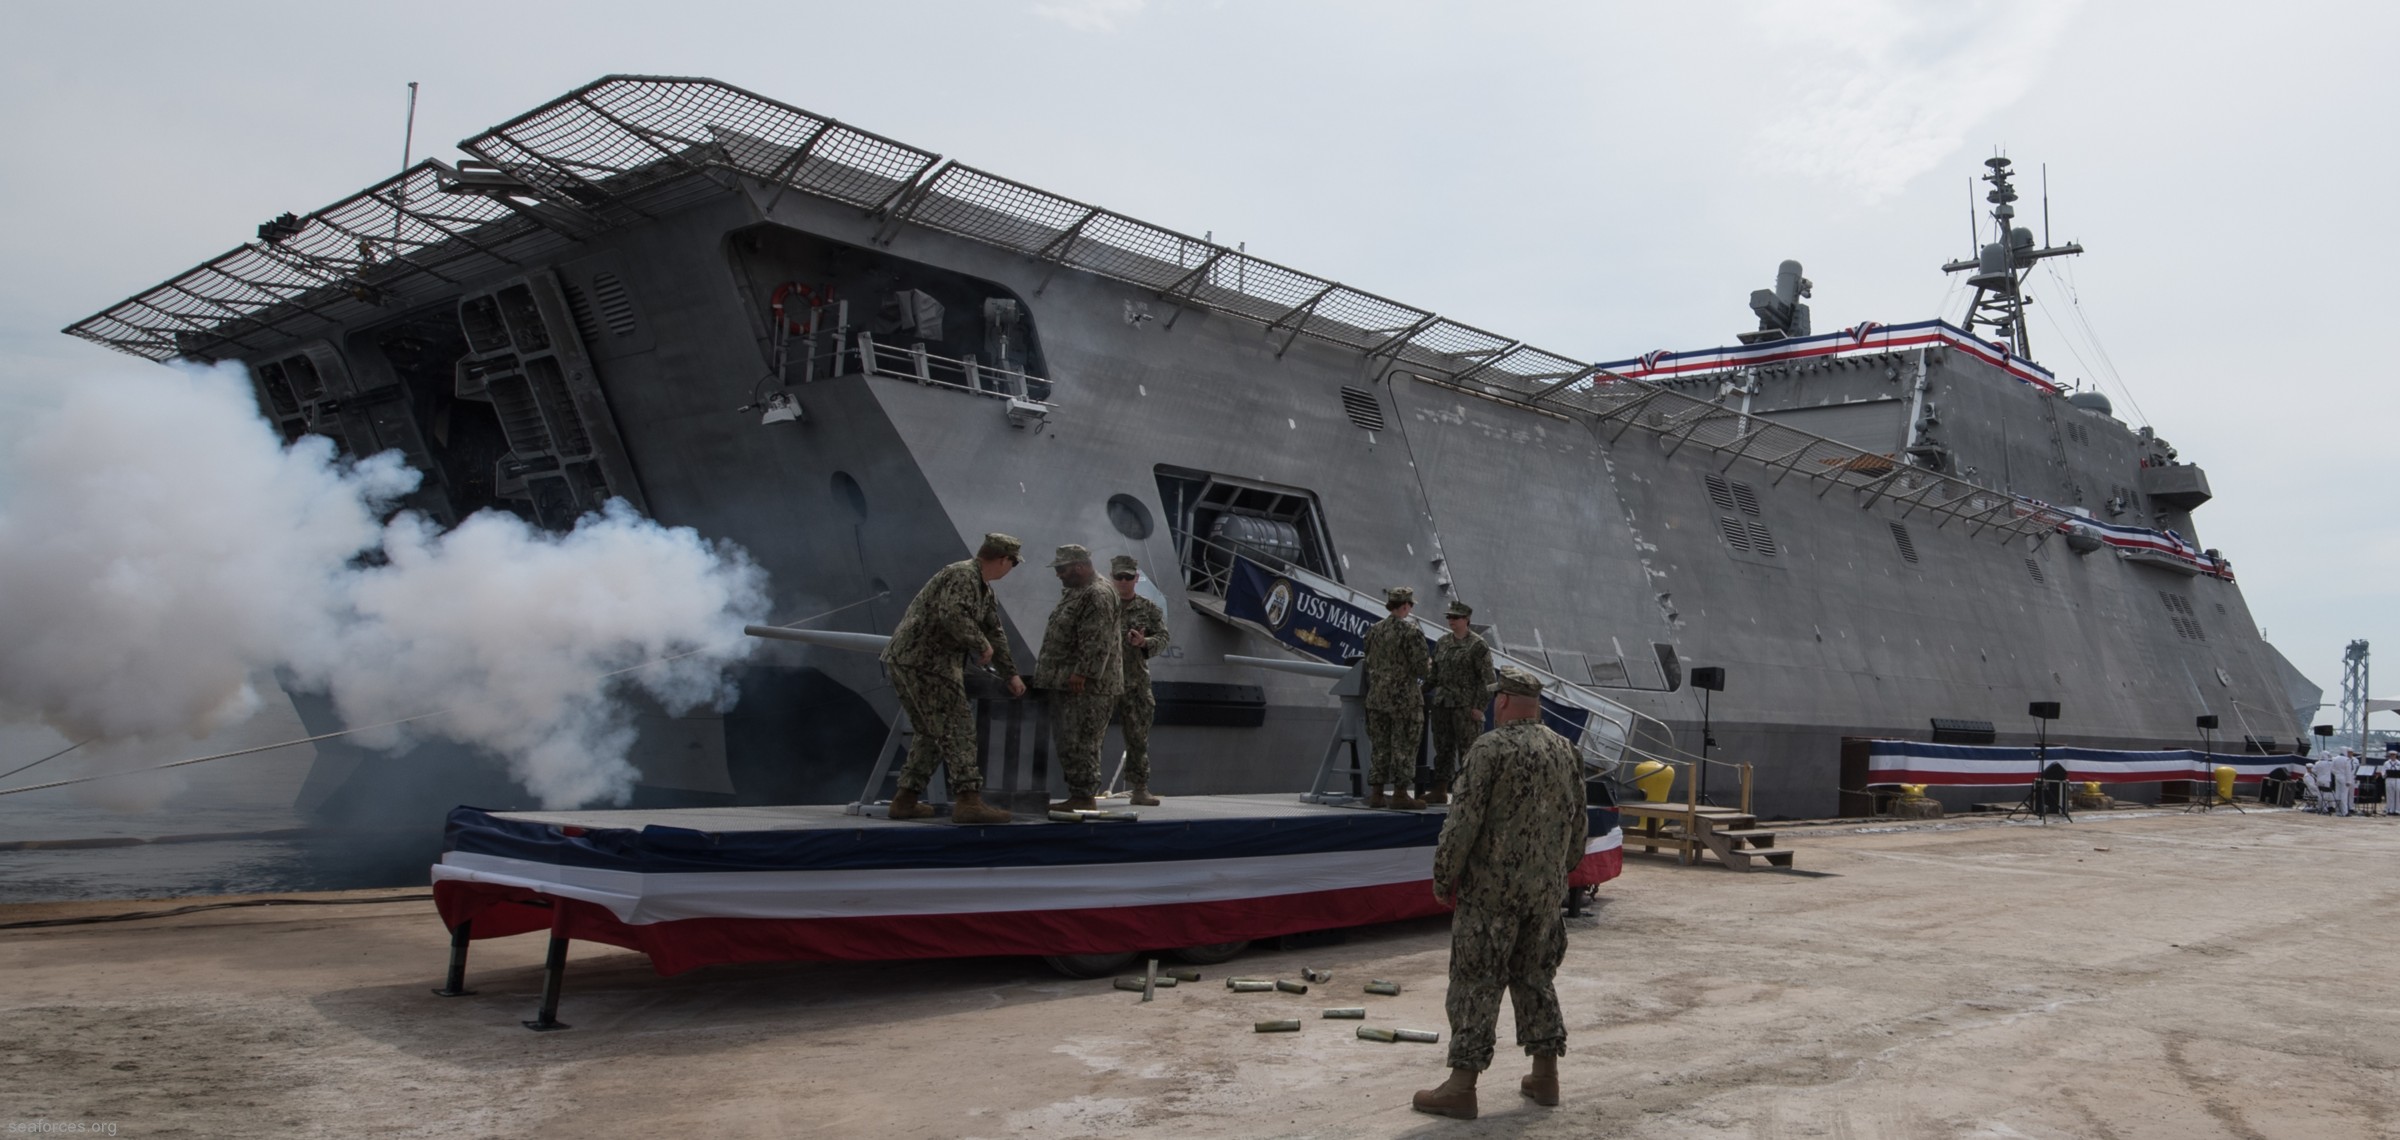 lcs-14 uss manchester littoral combat ship independence class us navy 04 commissioning ceremony